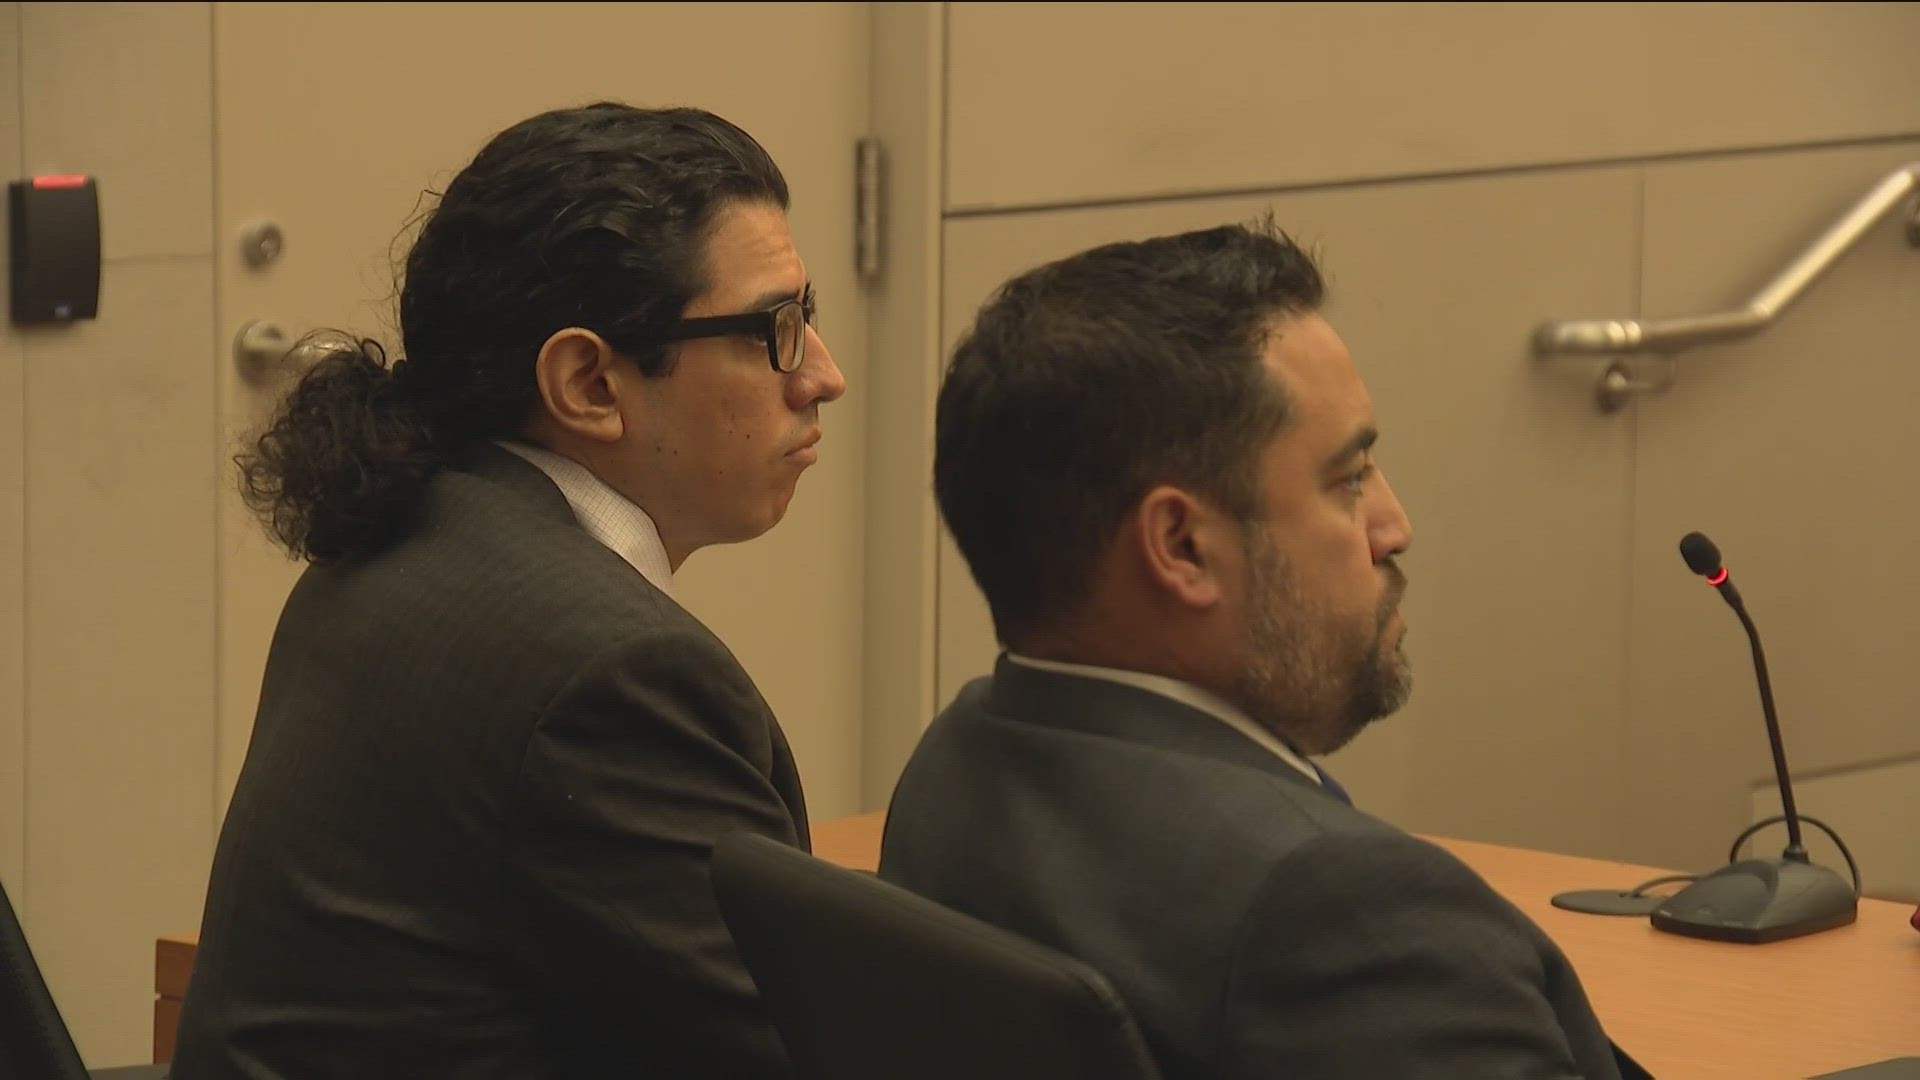 Jesse Milton Alvarez, 33, was found guilty by a San Diego jury following about a day of deliberations for fatally shooting Mario Fierro on Feb. 1, 2021.